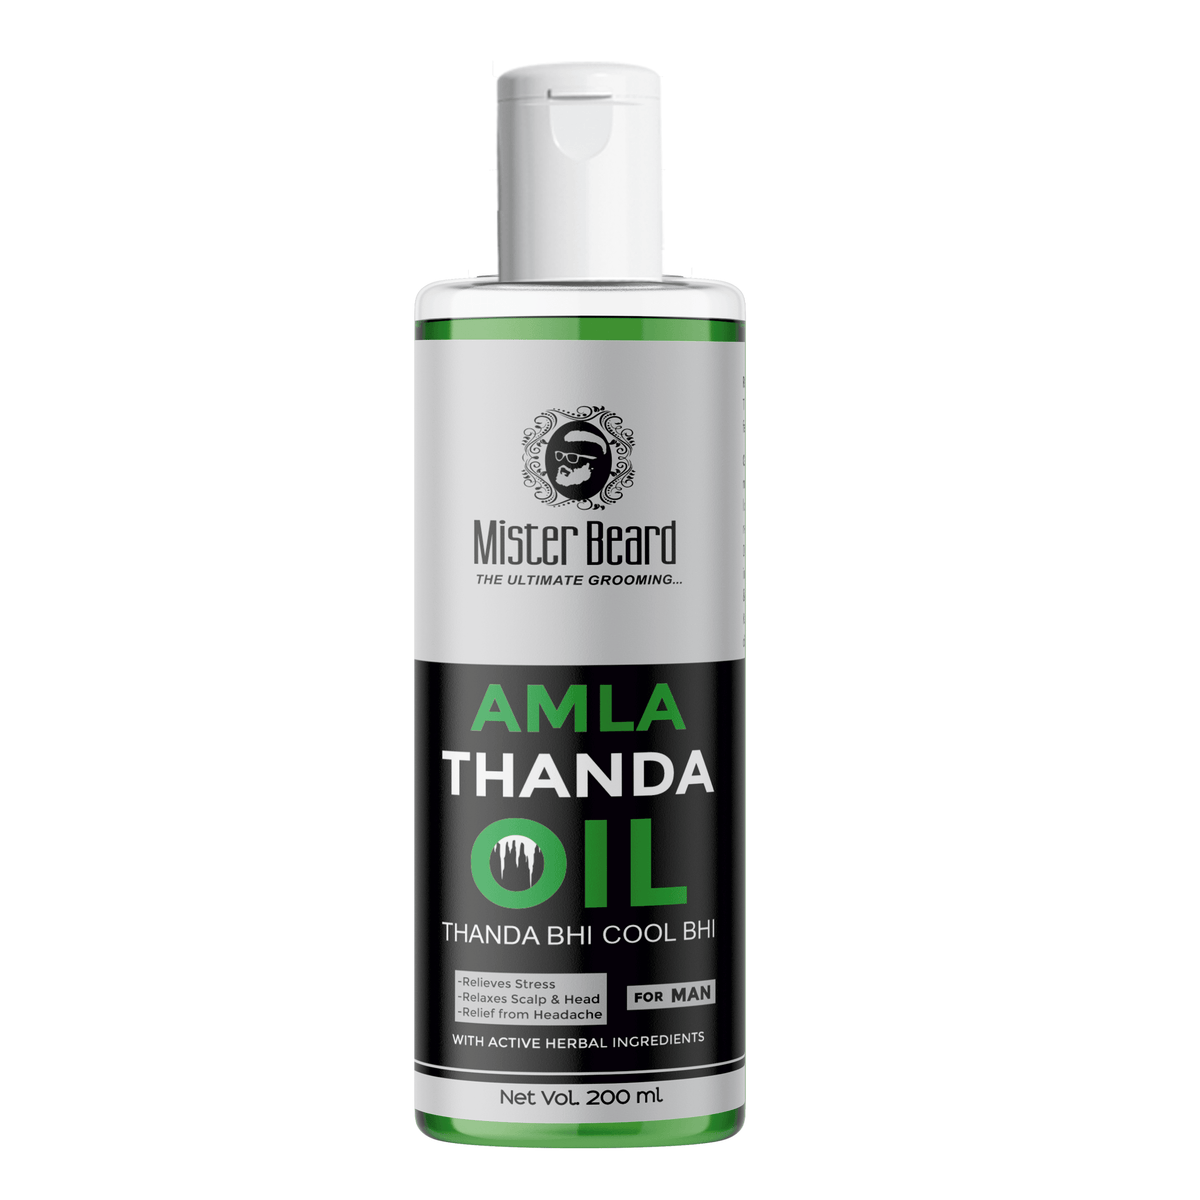 Mister Beard Amla Thanda Cool & Refreshing Hair Oil for Pain Relief Relaxation Hair Oil (200 ml) - Pink Root